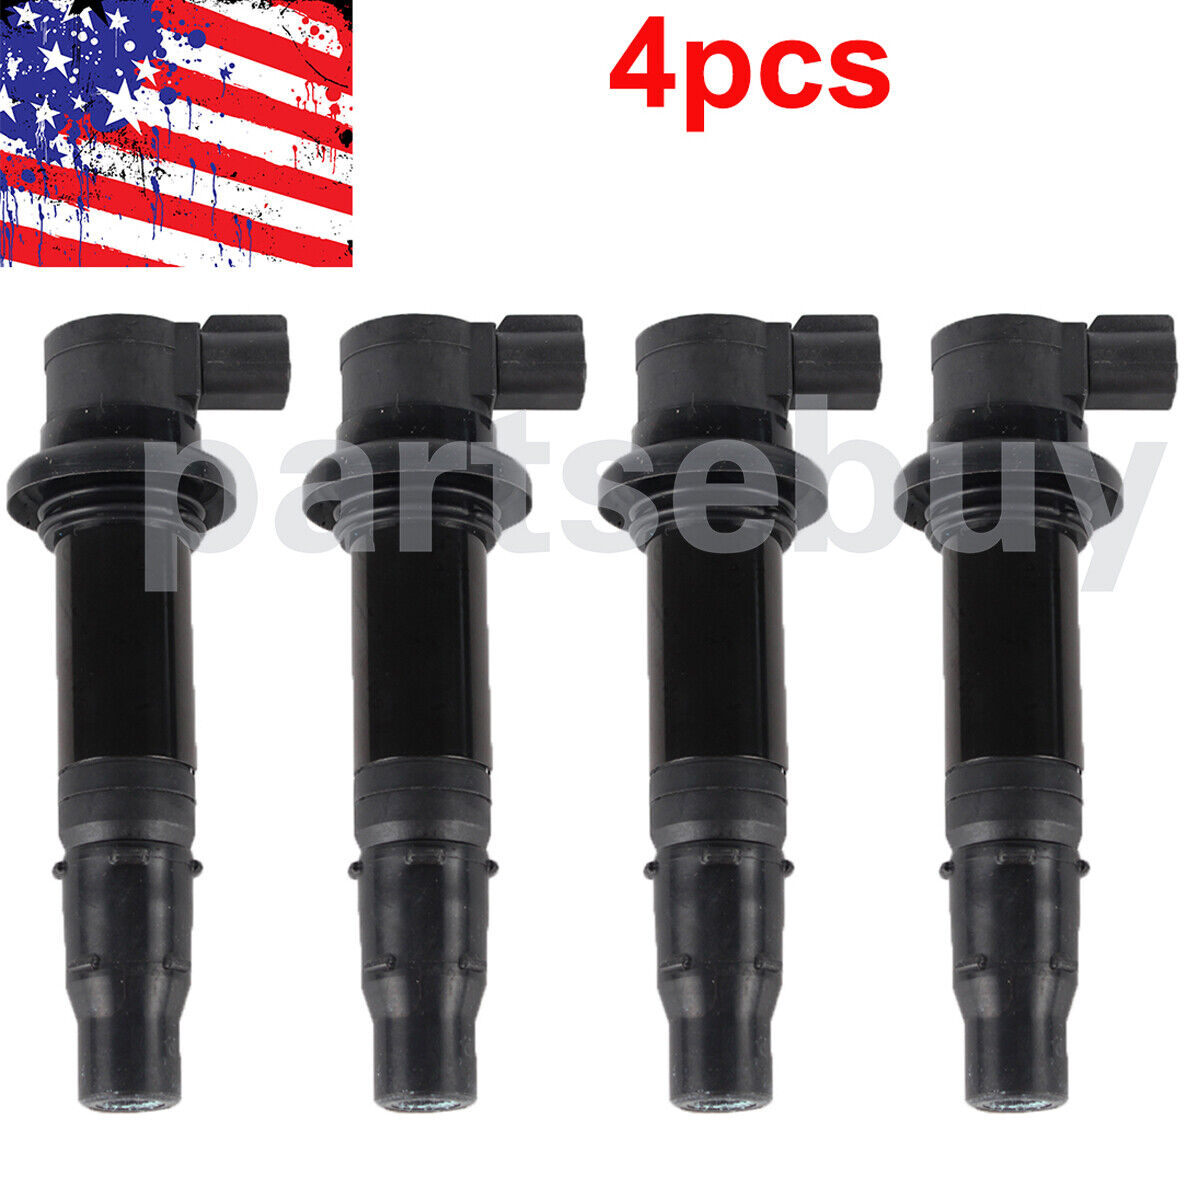 Ignition Coil for Yamaha YZF-R6 YZF-R6S YZF-R1 FZ1  V-MAX 1700 # 5VY-82310-00-00